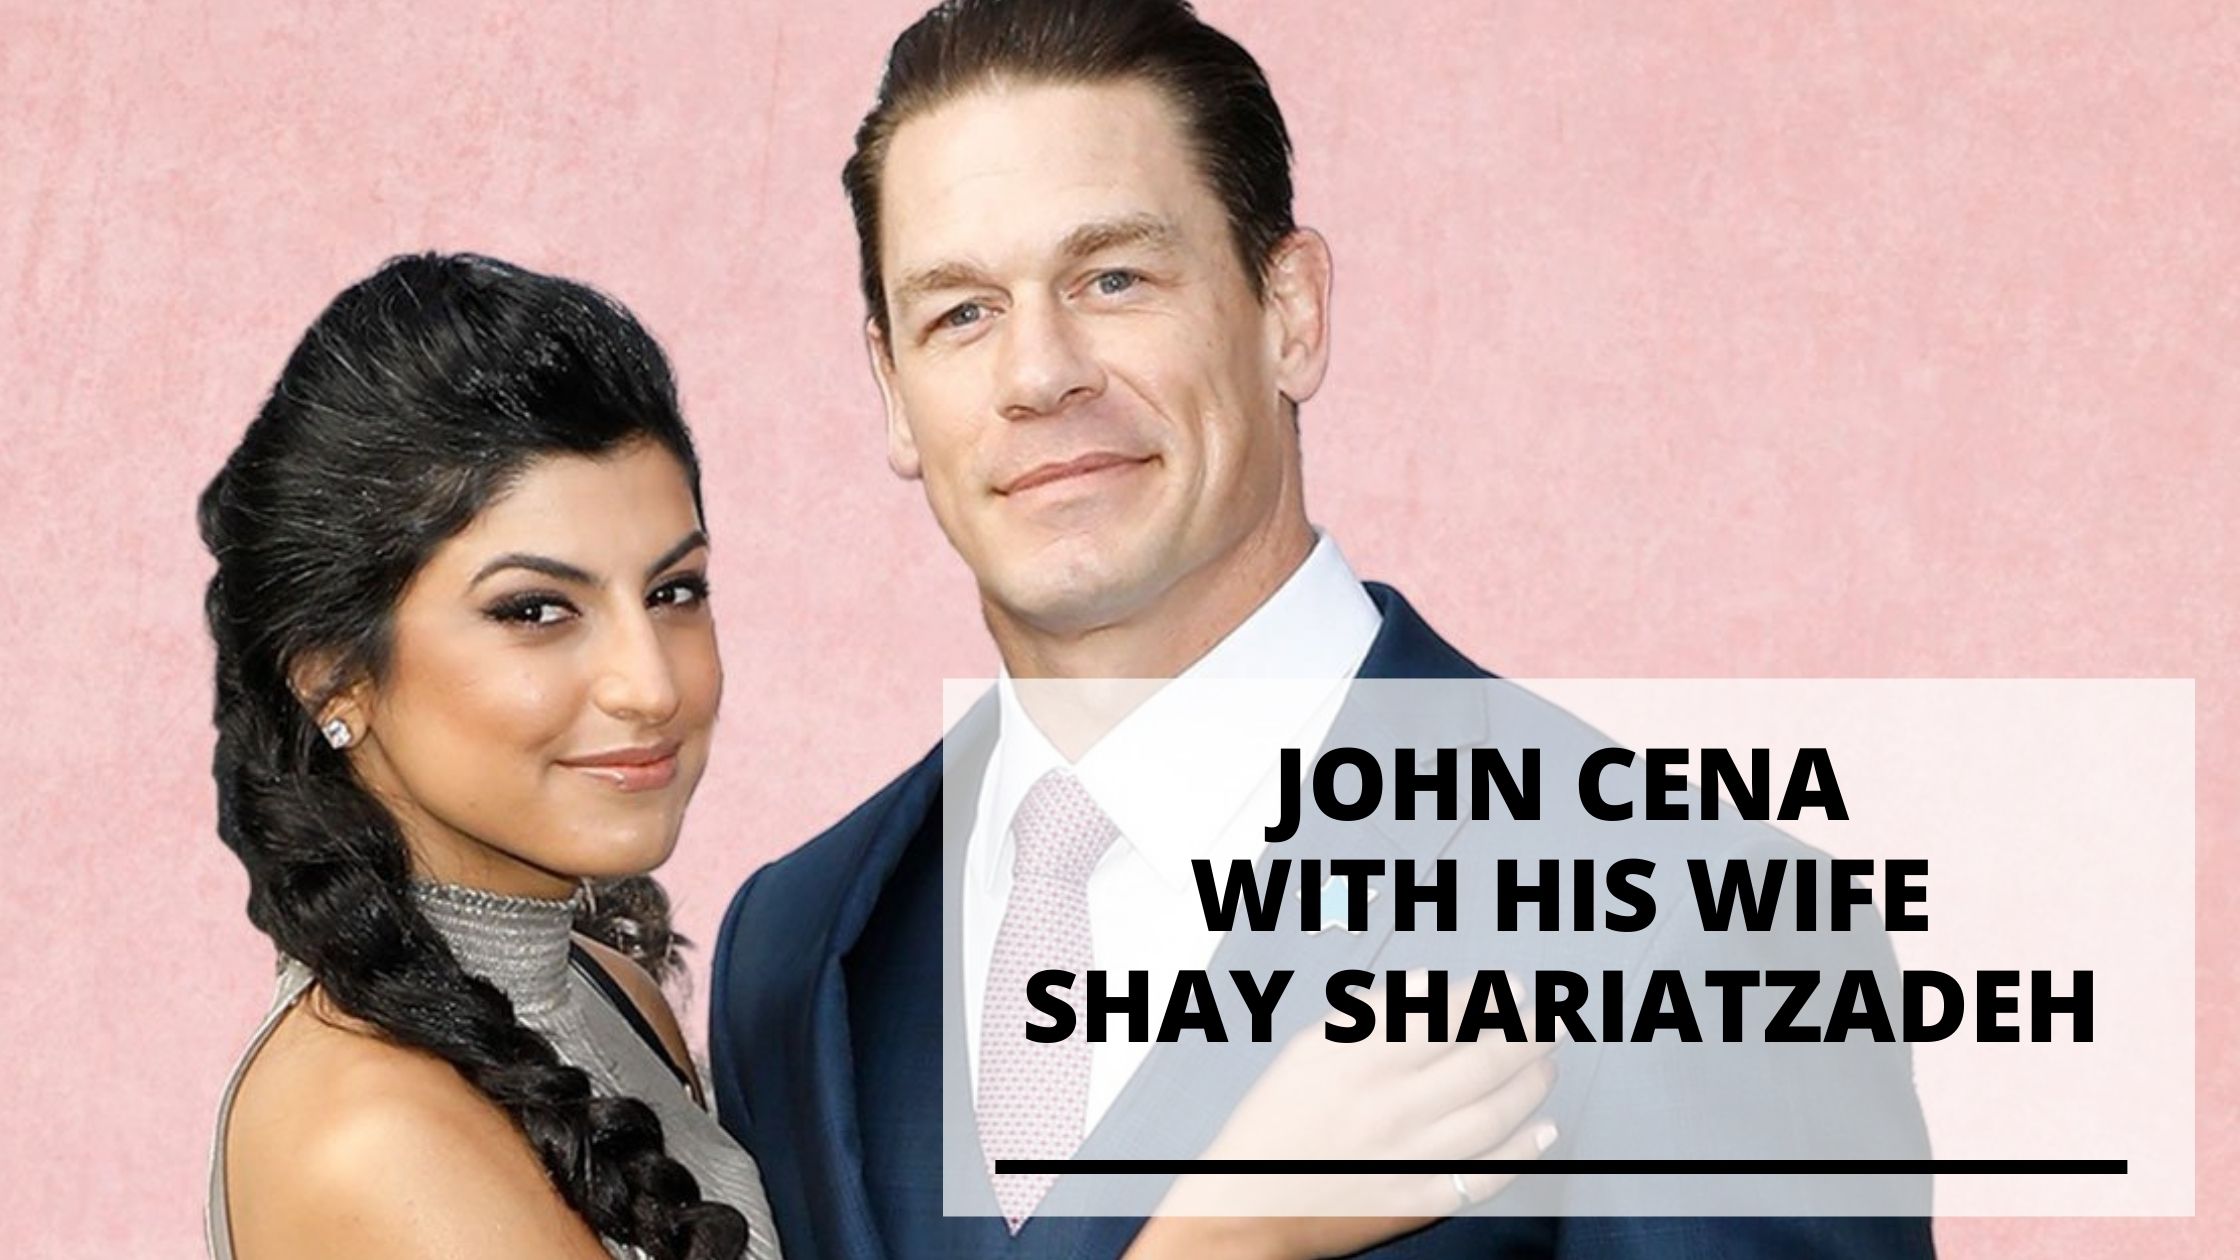 You are currently viewing 9 Pics of John Cena with His Wife Shay Shariatzadeh